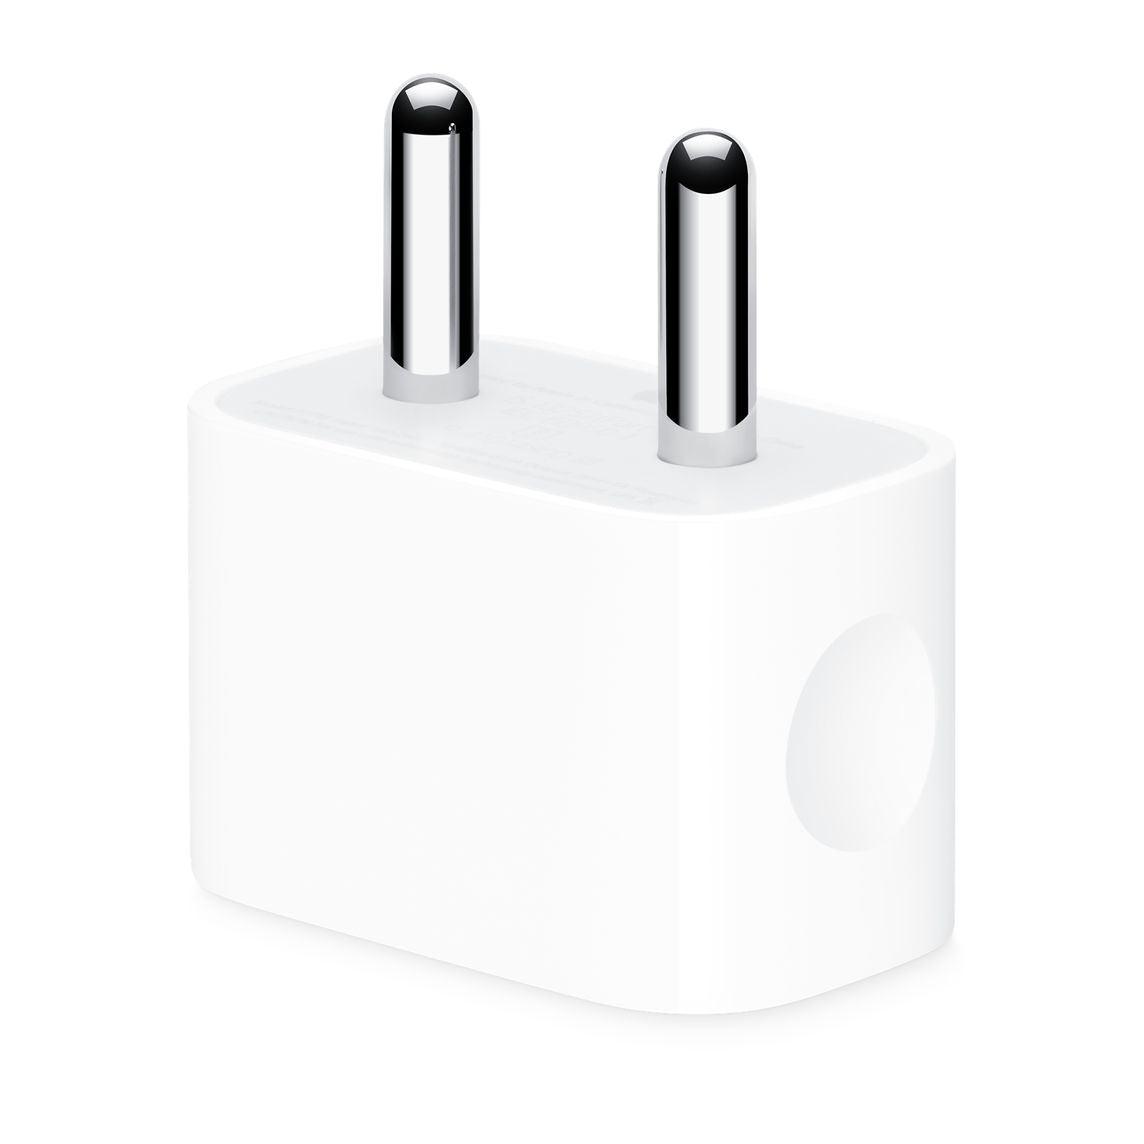 Apple 5W USB Power Adapter - Grab Your Gadget